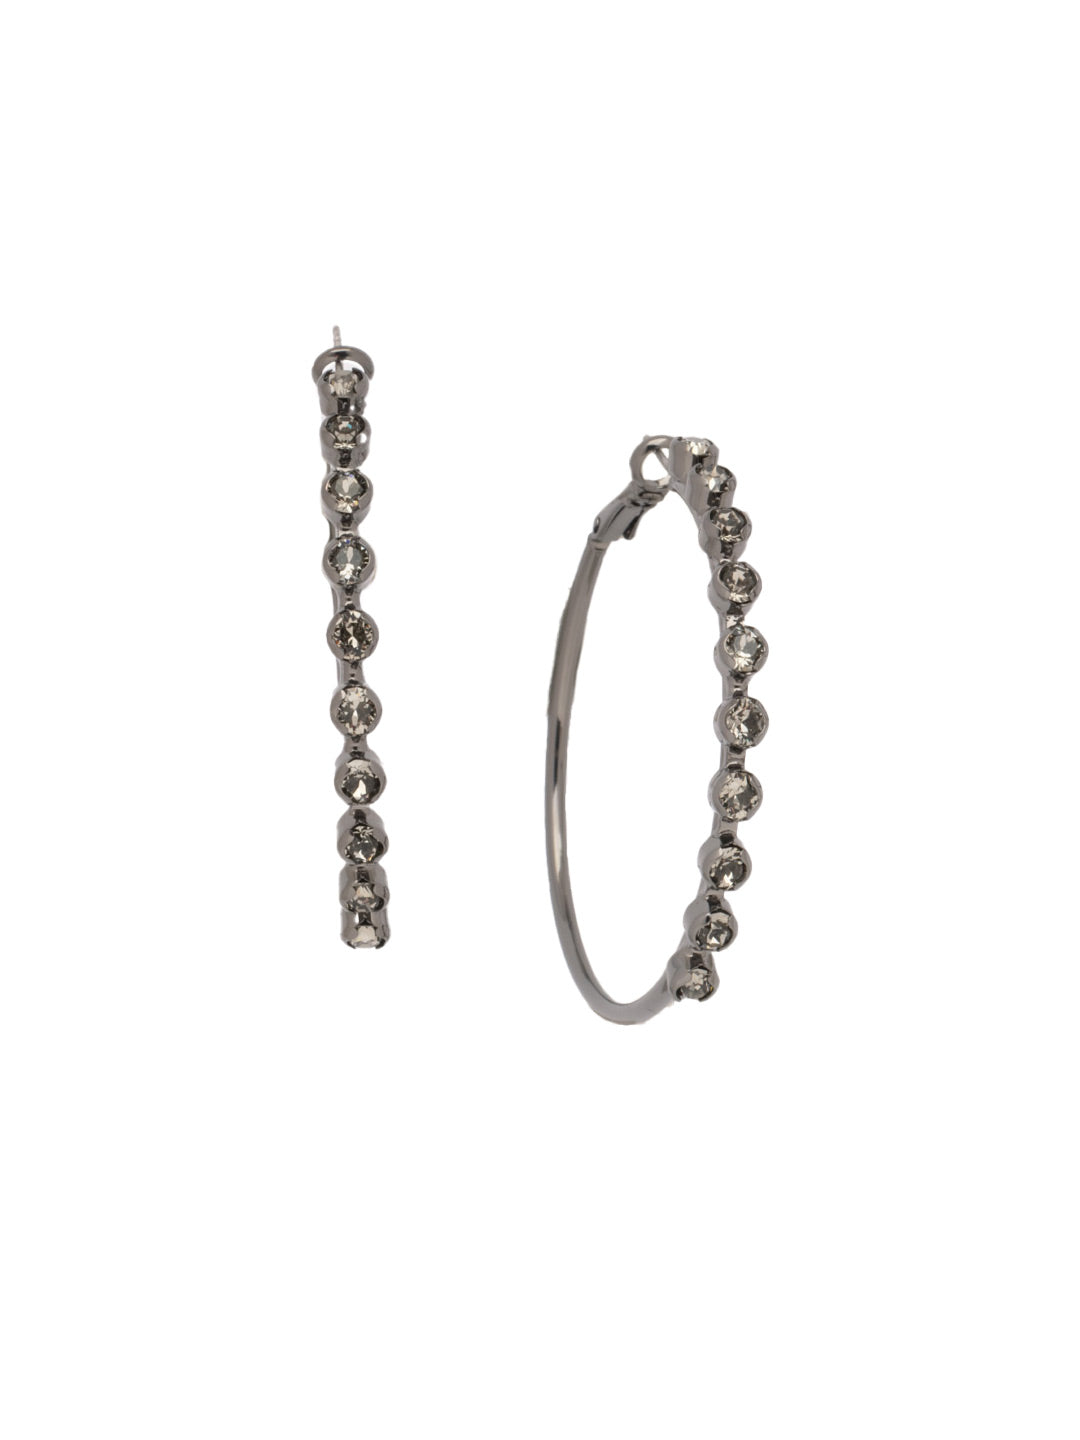 Bessie Hoop Earrings - EFF42GMBD - <p>The Bessie Hoop Earrings feature a row of crystals on a classic metal hoop. From Sorrelli's Black Diamond collection in our Gun Metal finish.</p>